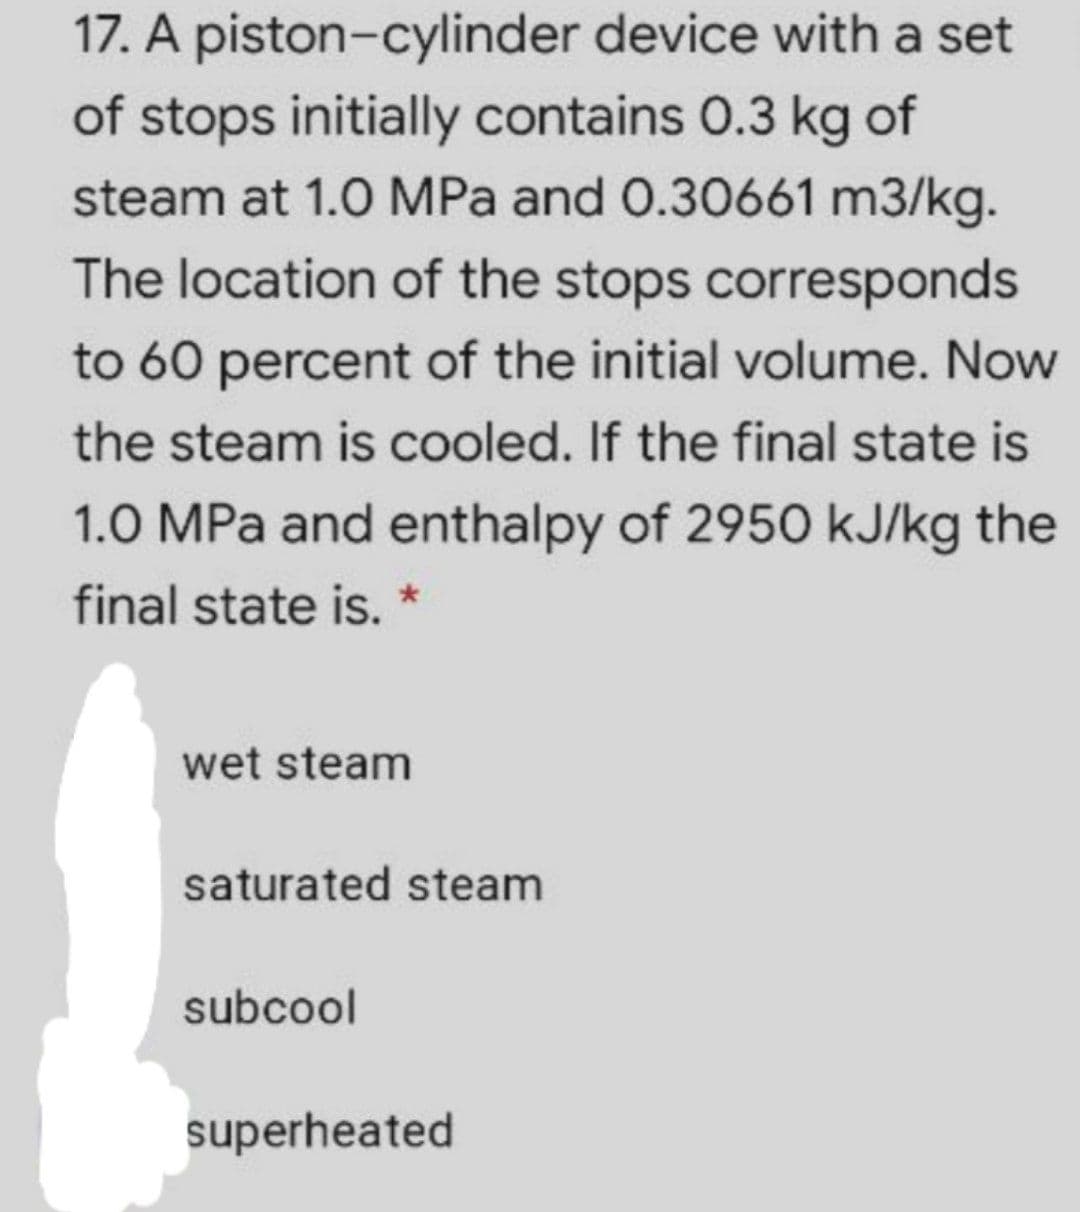 17. A piston-cylinder device with a set
of stops initially contains 0.3 kg of
steam at 1.0 MPa and 0.30661 m3/kg.
The location of the stops corresponds
to 60 percent of the initial volume. Now
the steam is cooled. If the final state is
1.0 MPa and enthalpy of 2950 kJ/kg the
final state is. *
wet steam
saturated steam
subcool
superheated
